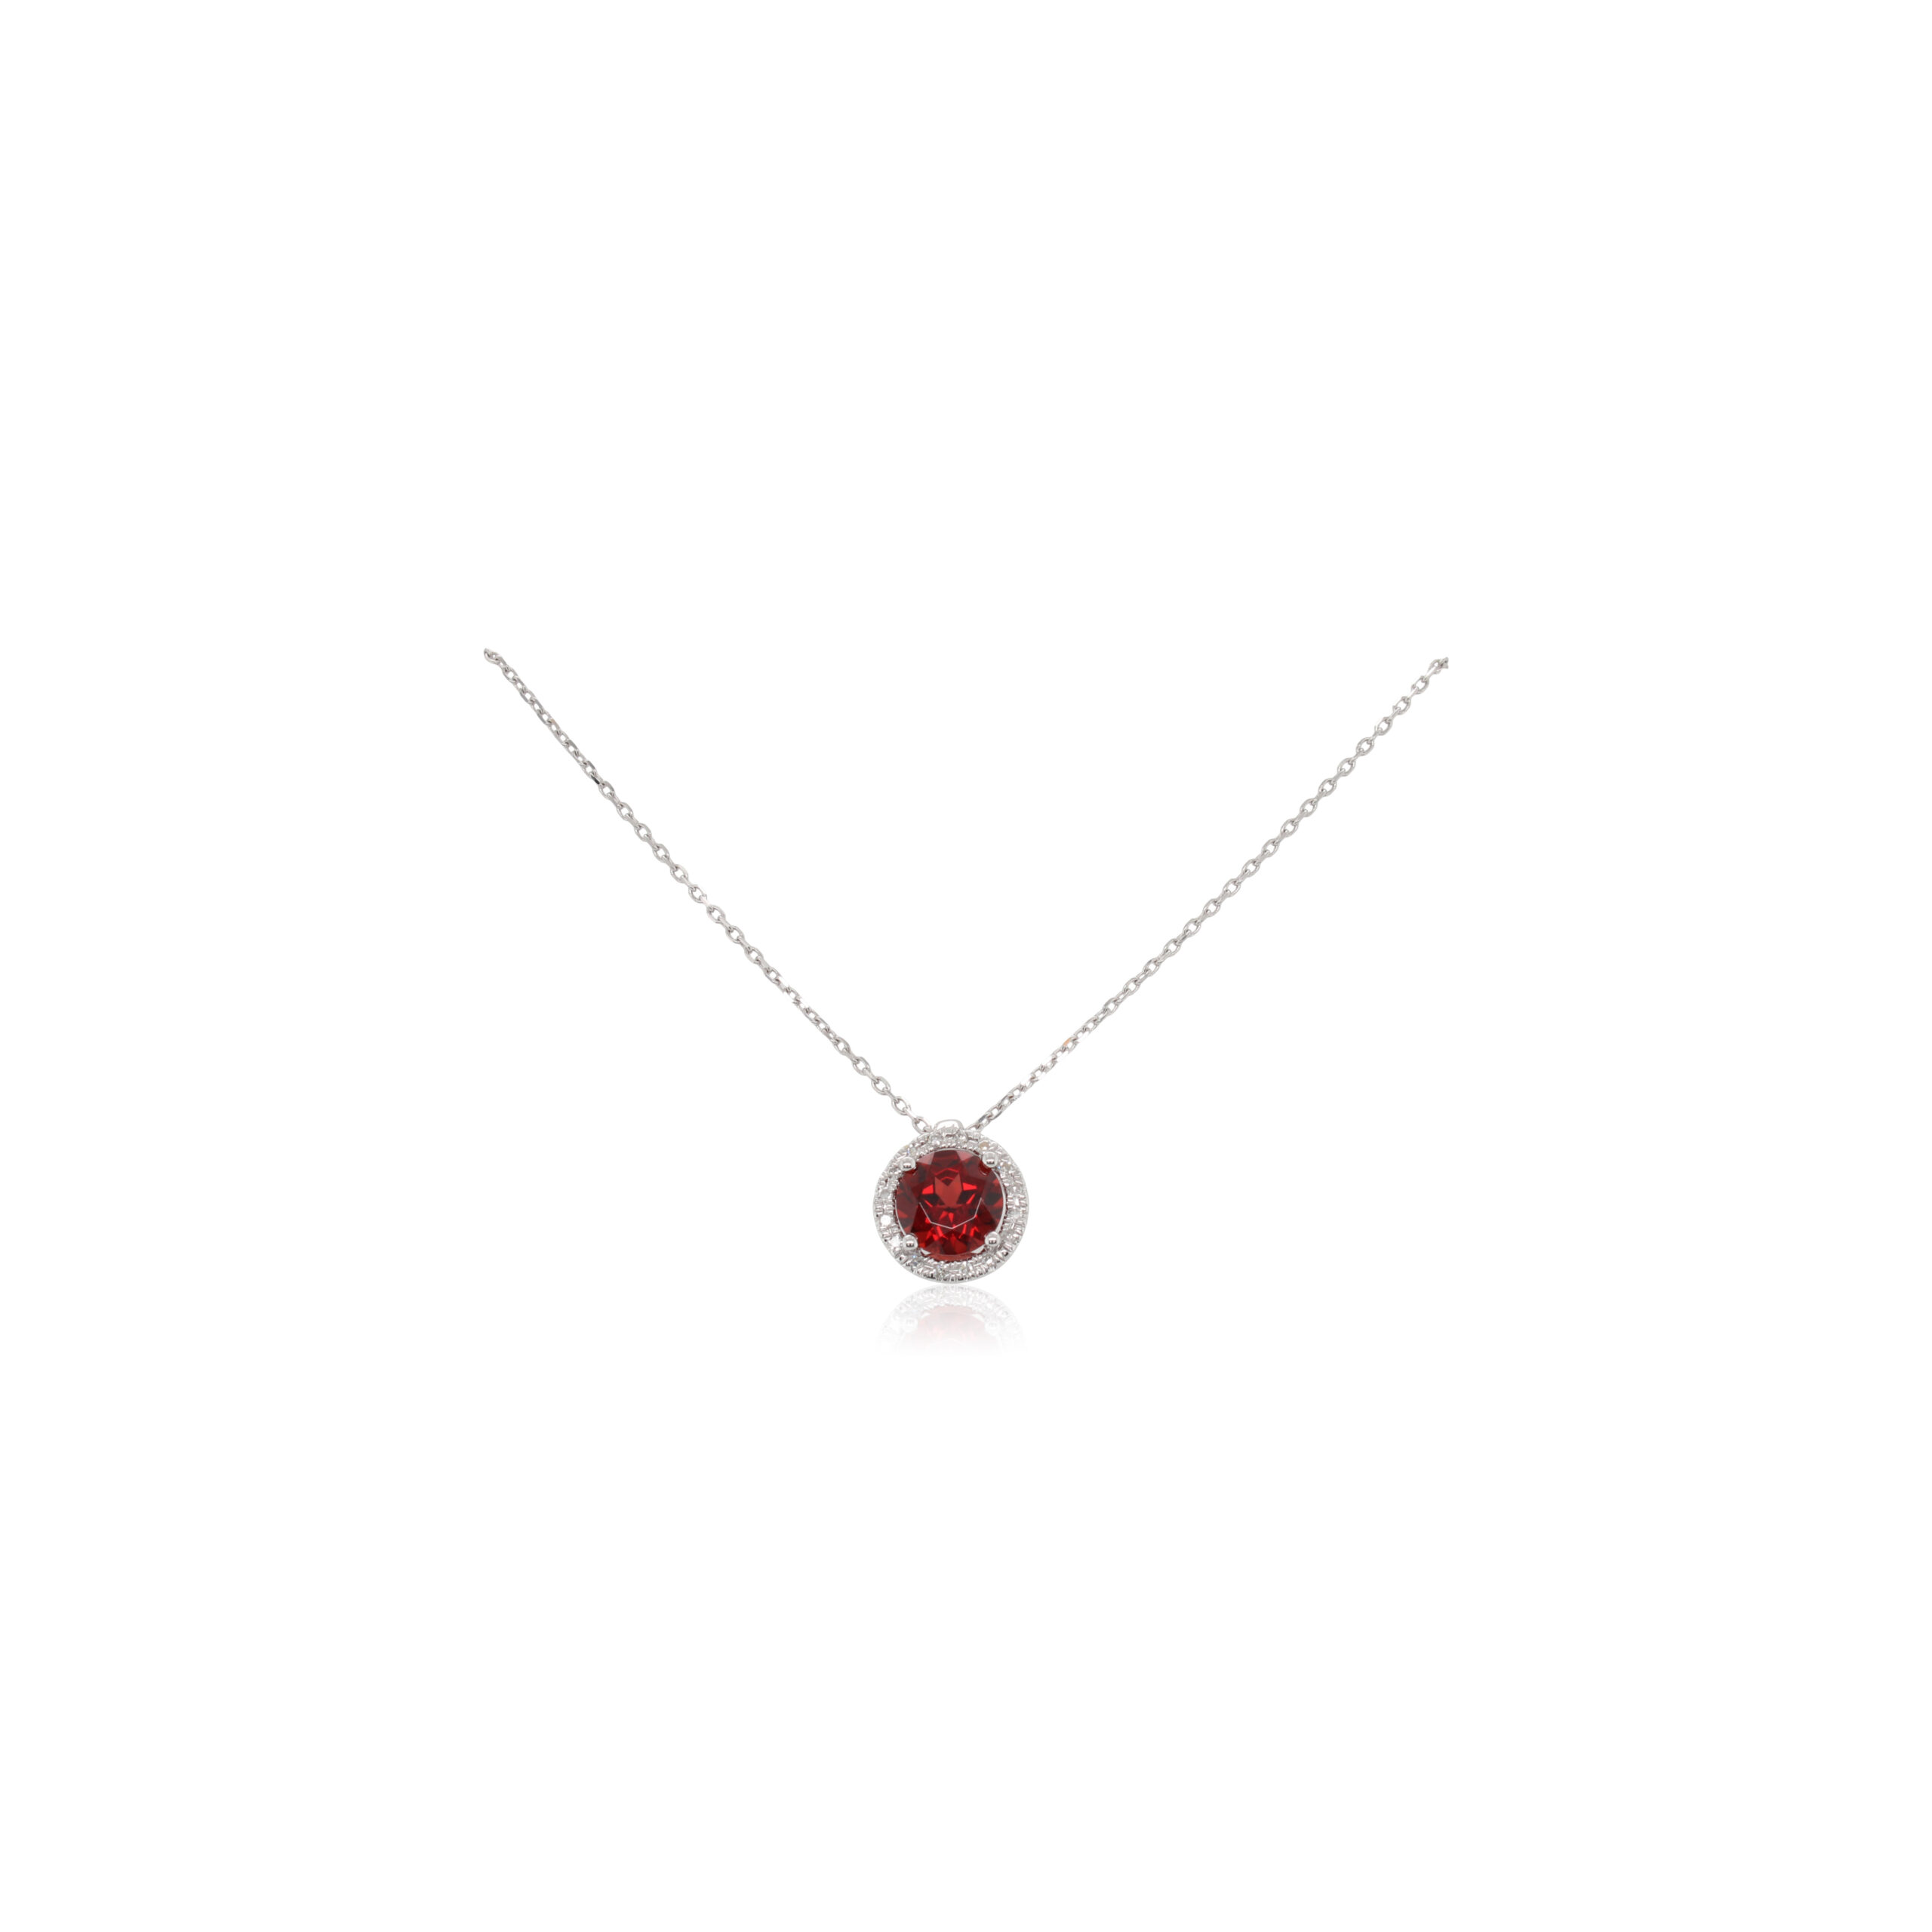 This necklace from In Style by Rafael is crafted from 14k white gold and features a 1.00ct round garnet and 0.05 total carats of diamonds around the halo.